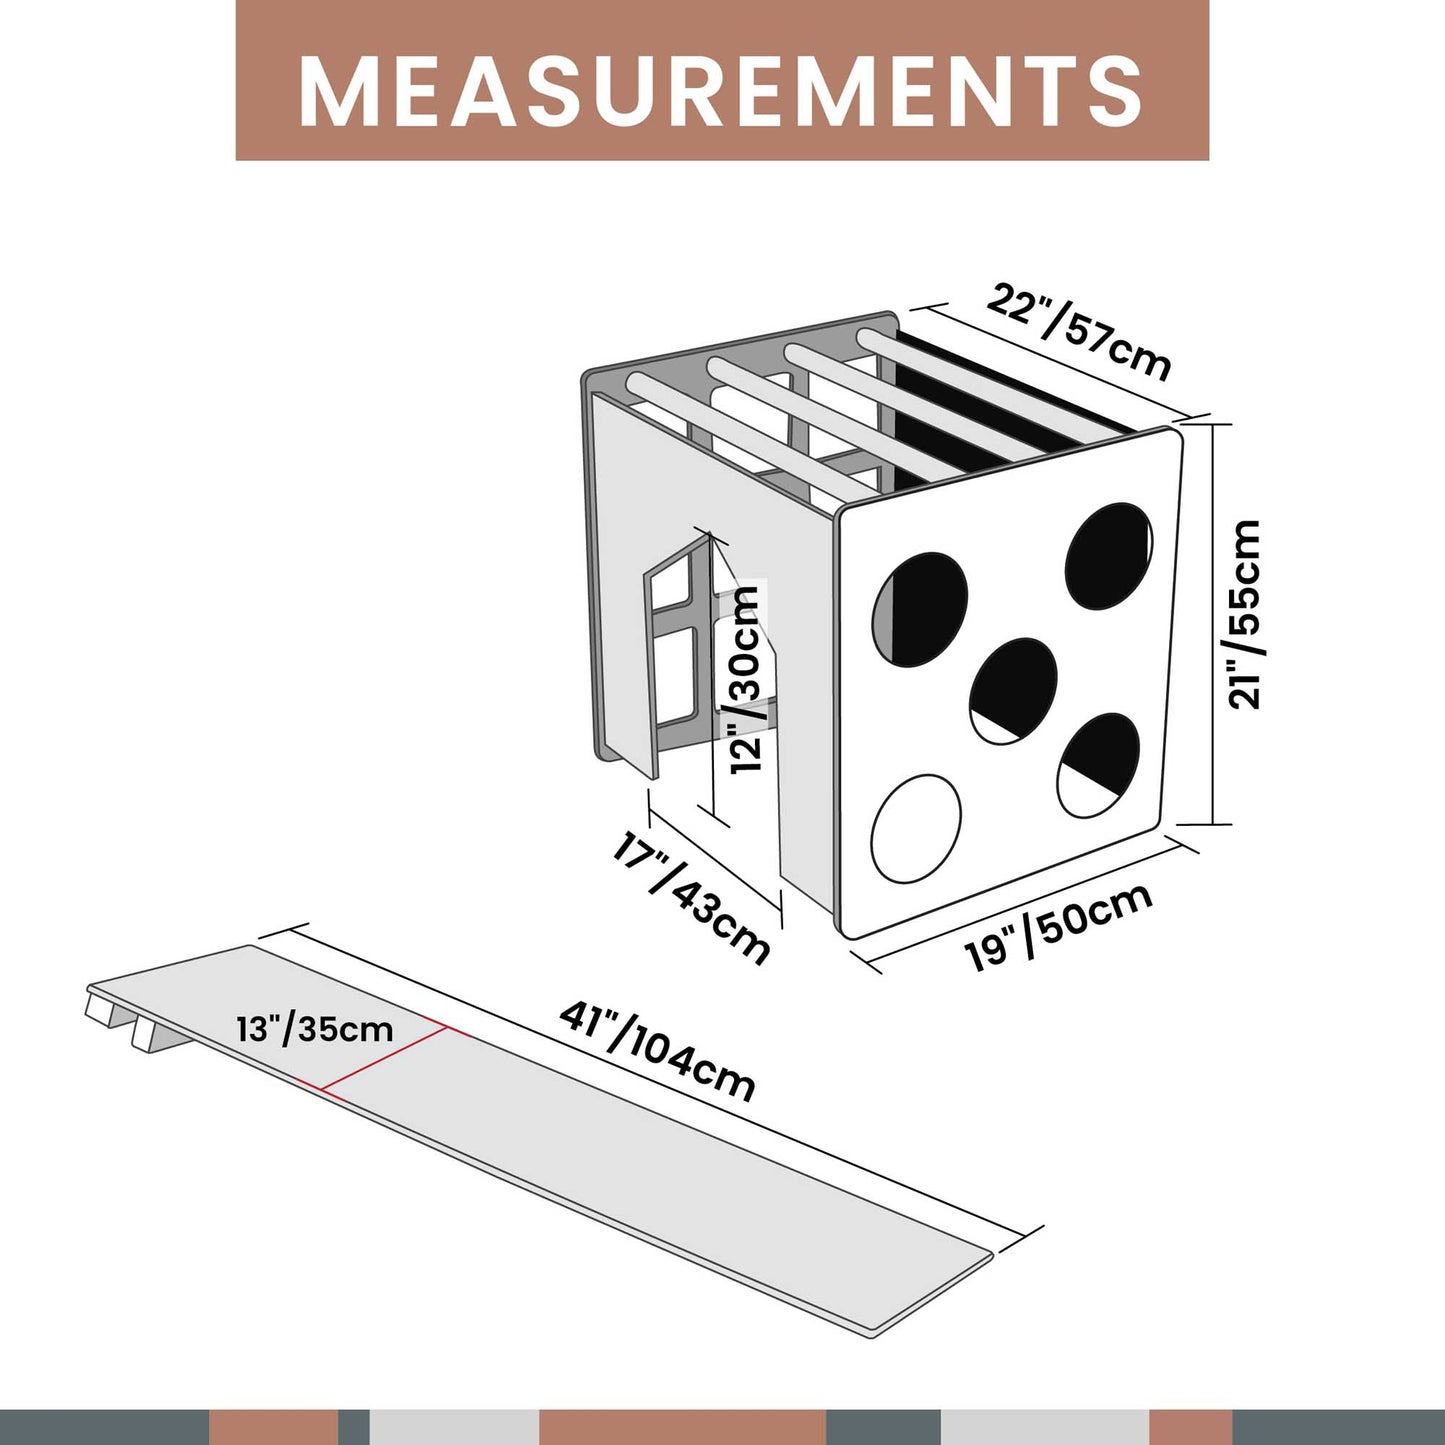 A diagram showing the measurements of a wooden box, montessori climber, balance beams, climbing arch, and an Activity cube with sensory panels and a ramp from Sweet Home From Wood.